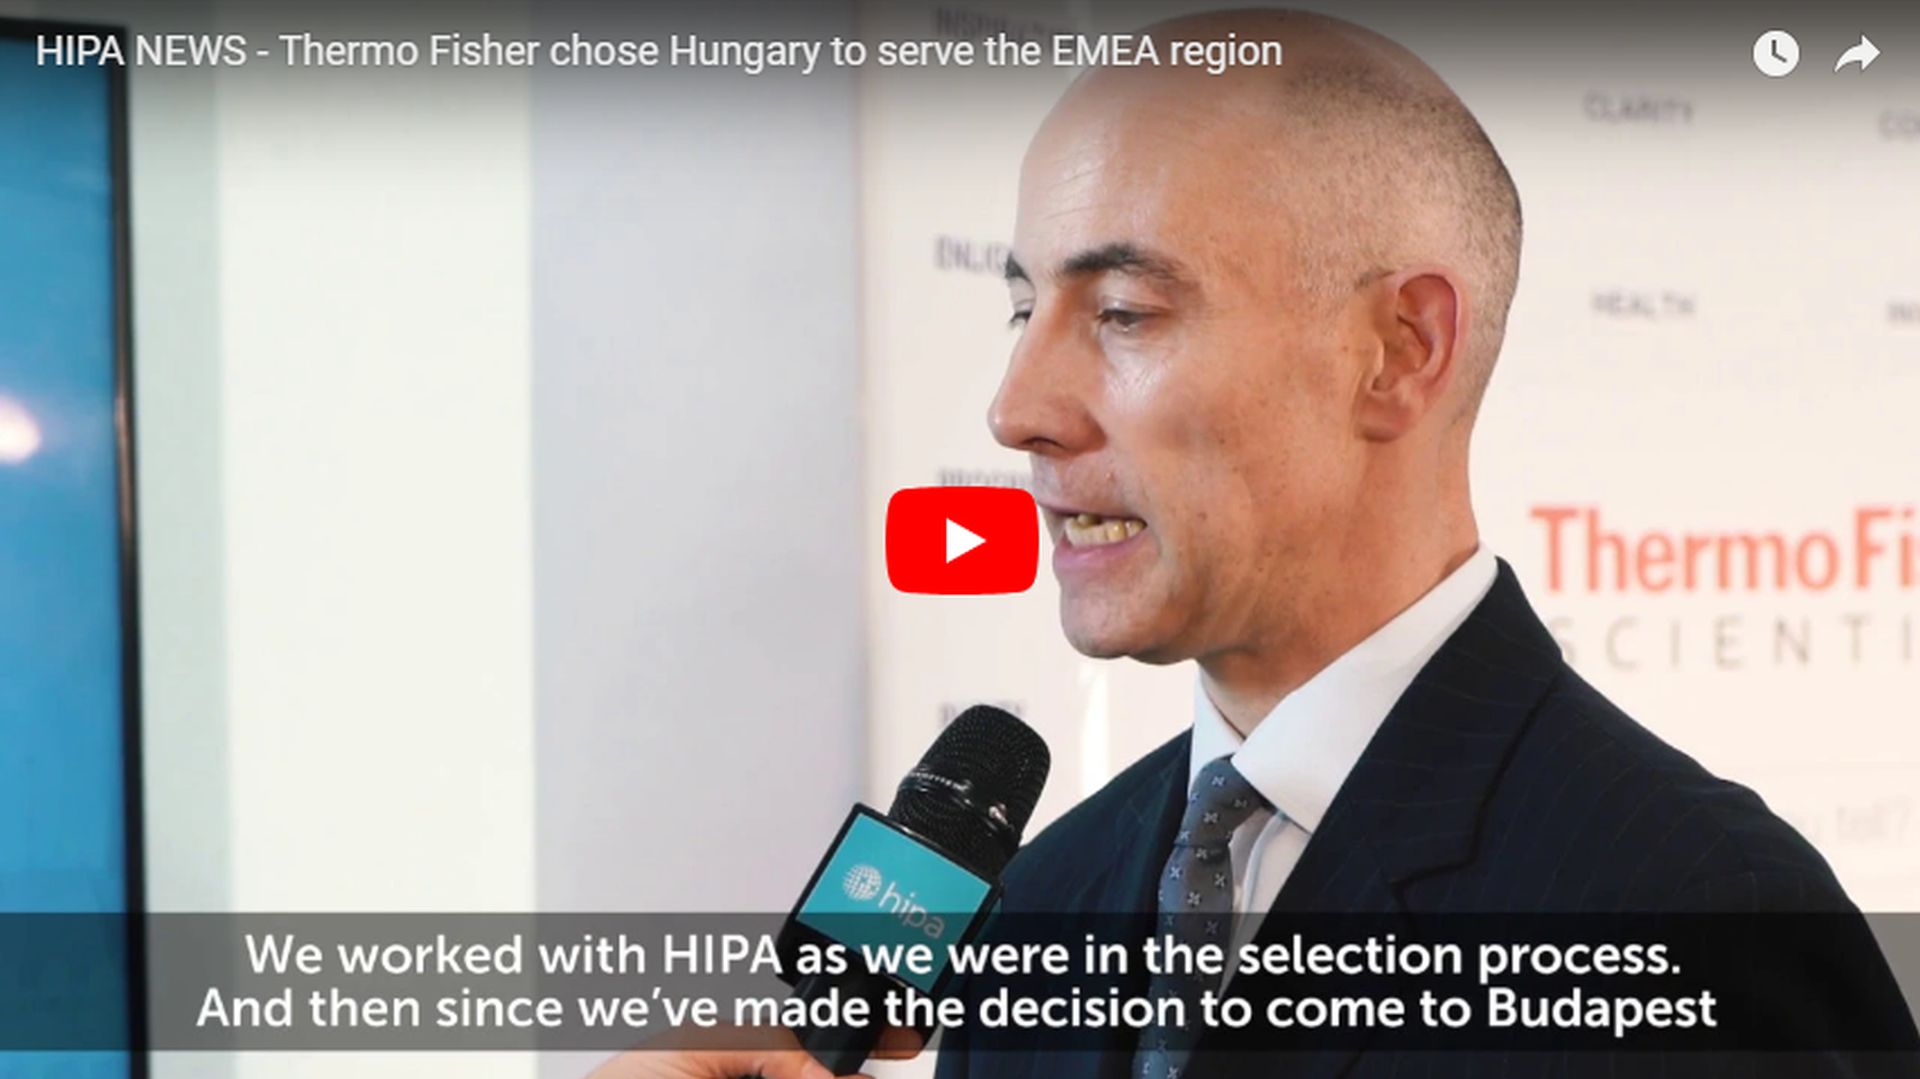 Thermo Fisher votes for Hungary in the EMEA region